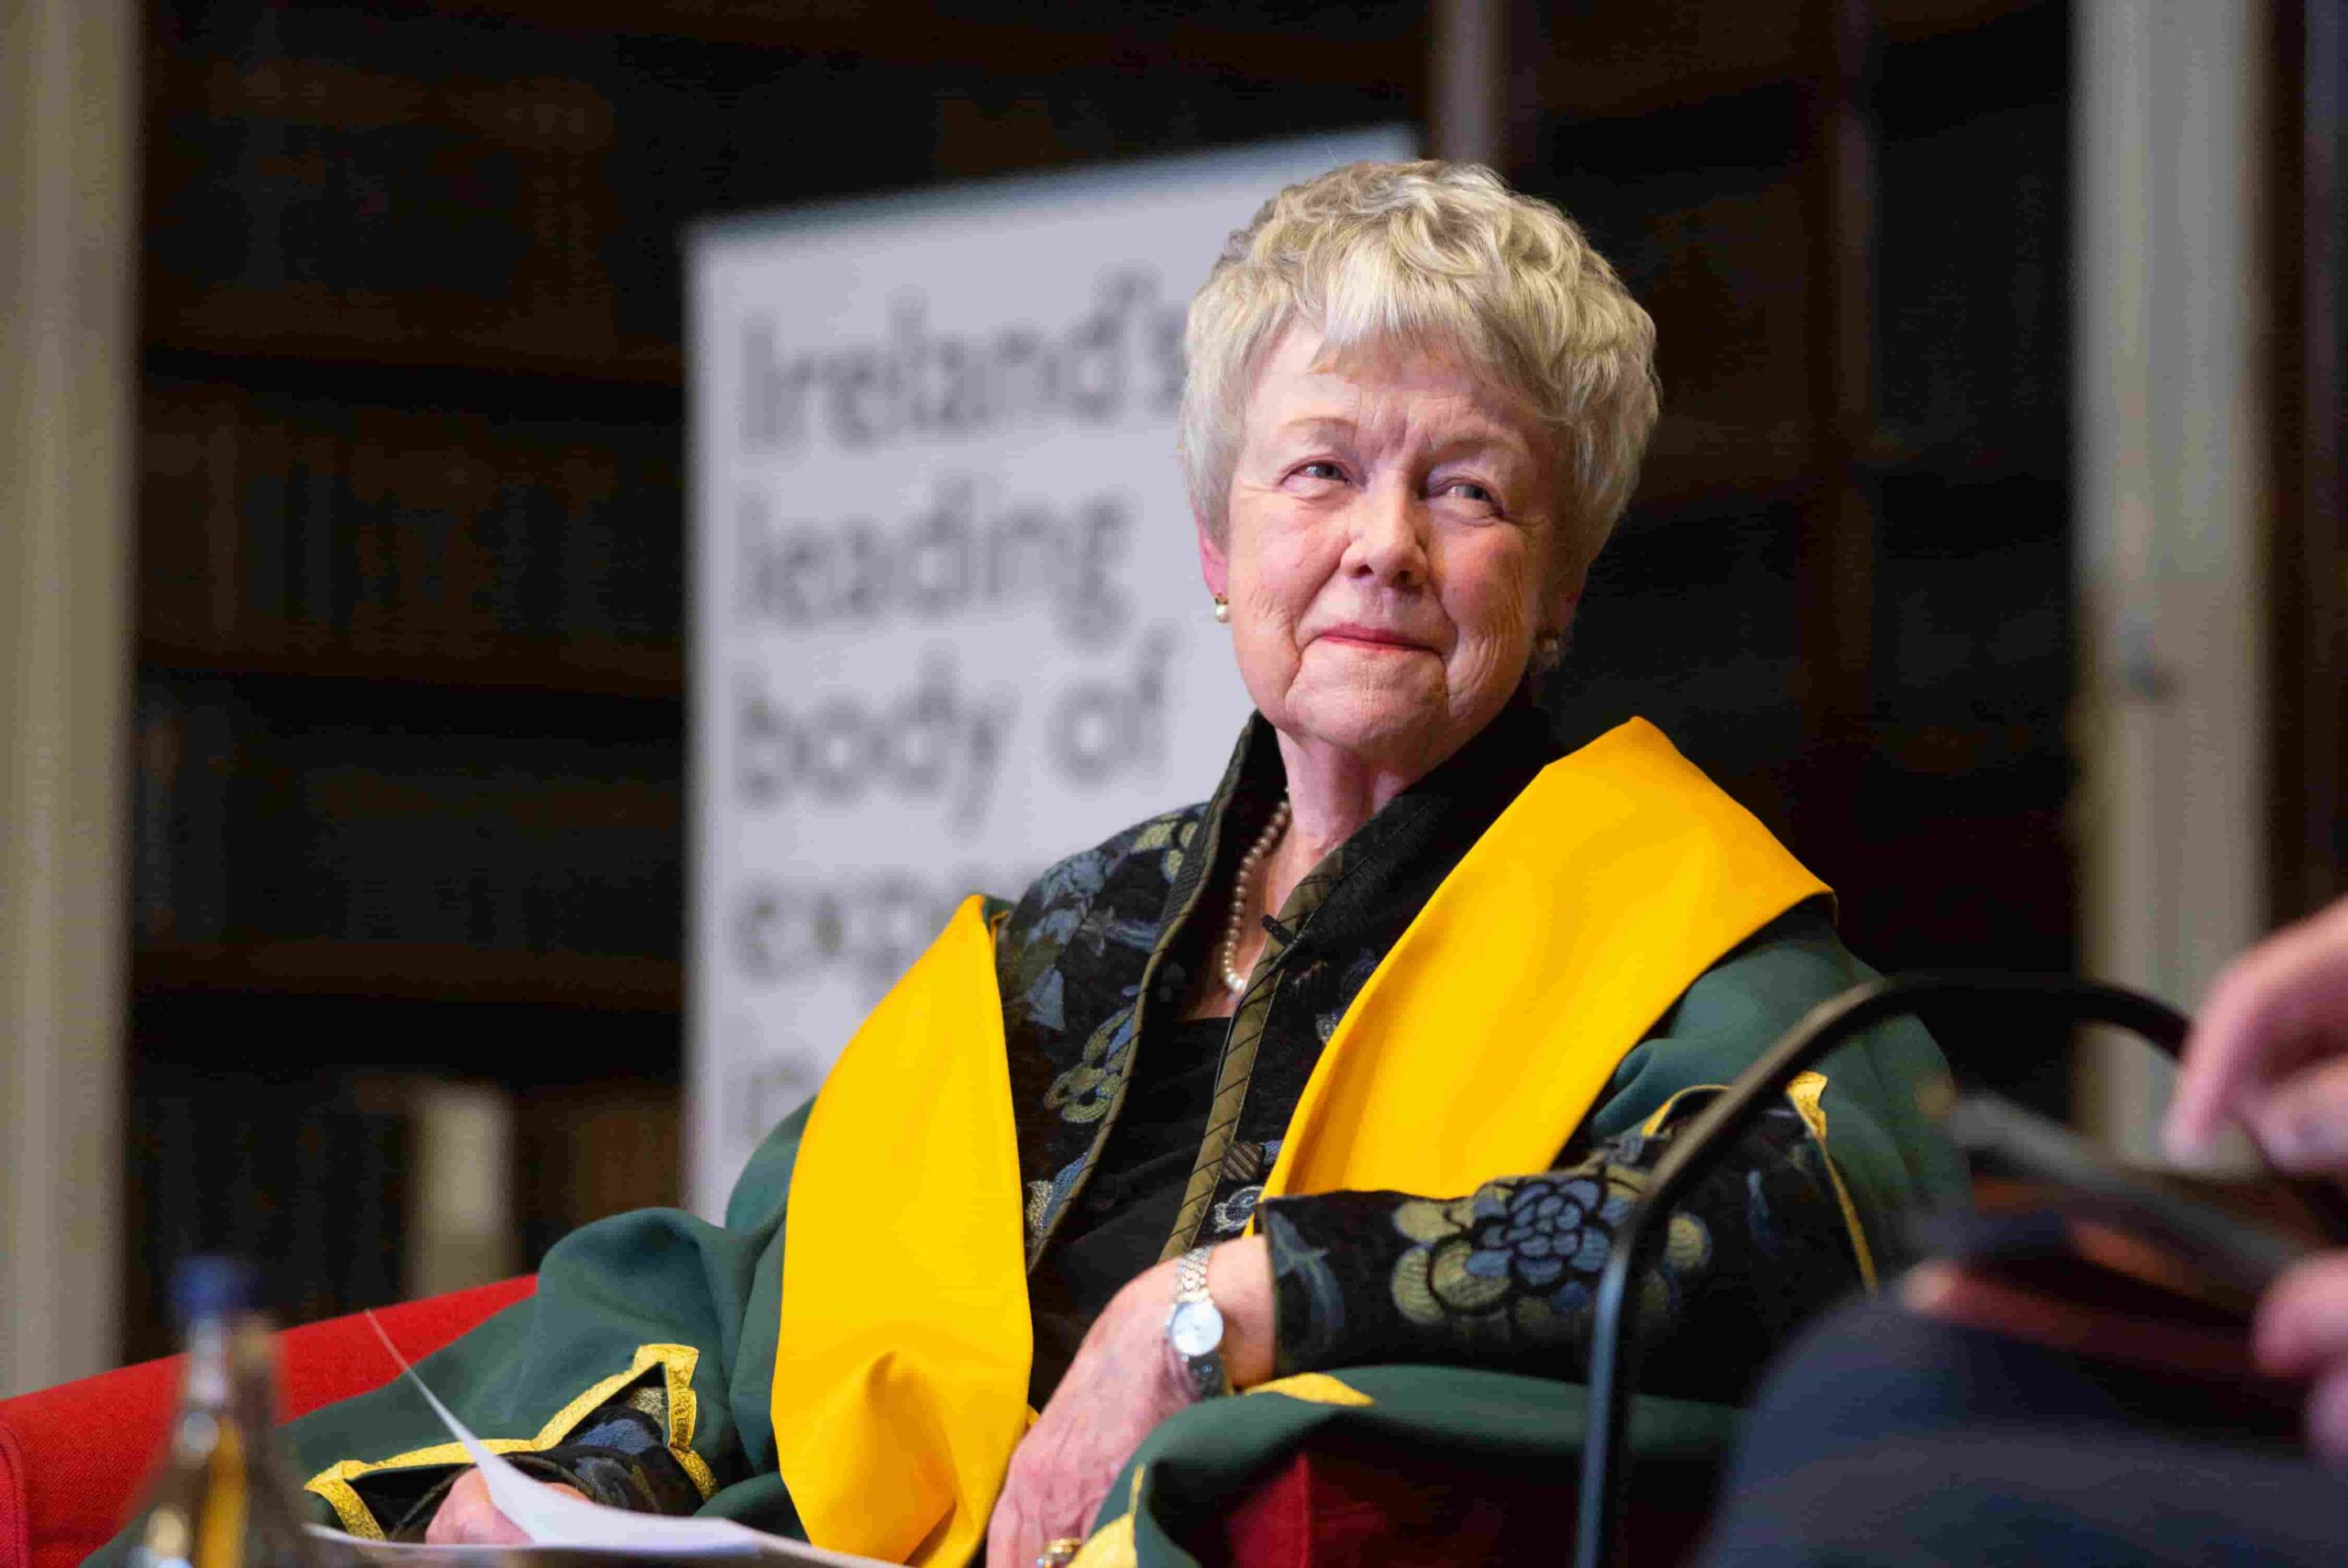 Image of a woman with white cropped hair sitting in a chair. She is wearing yellow and green ceremonial robes and smiling toward someone to the right.